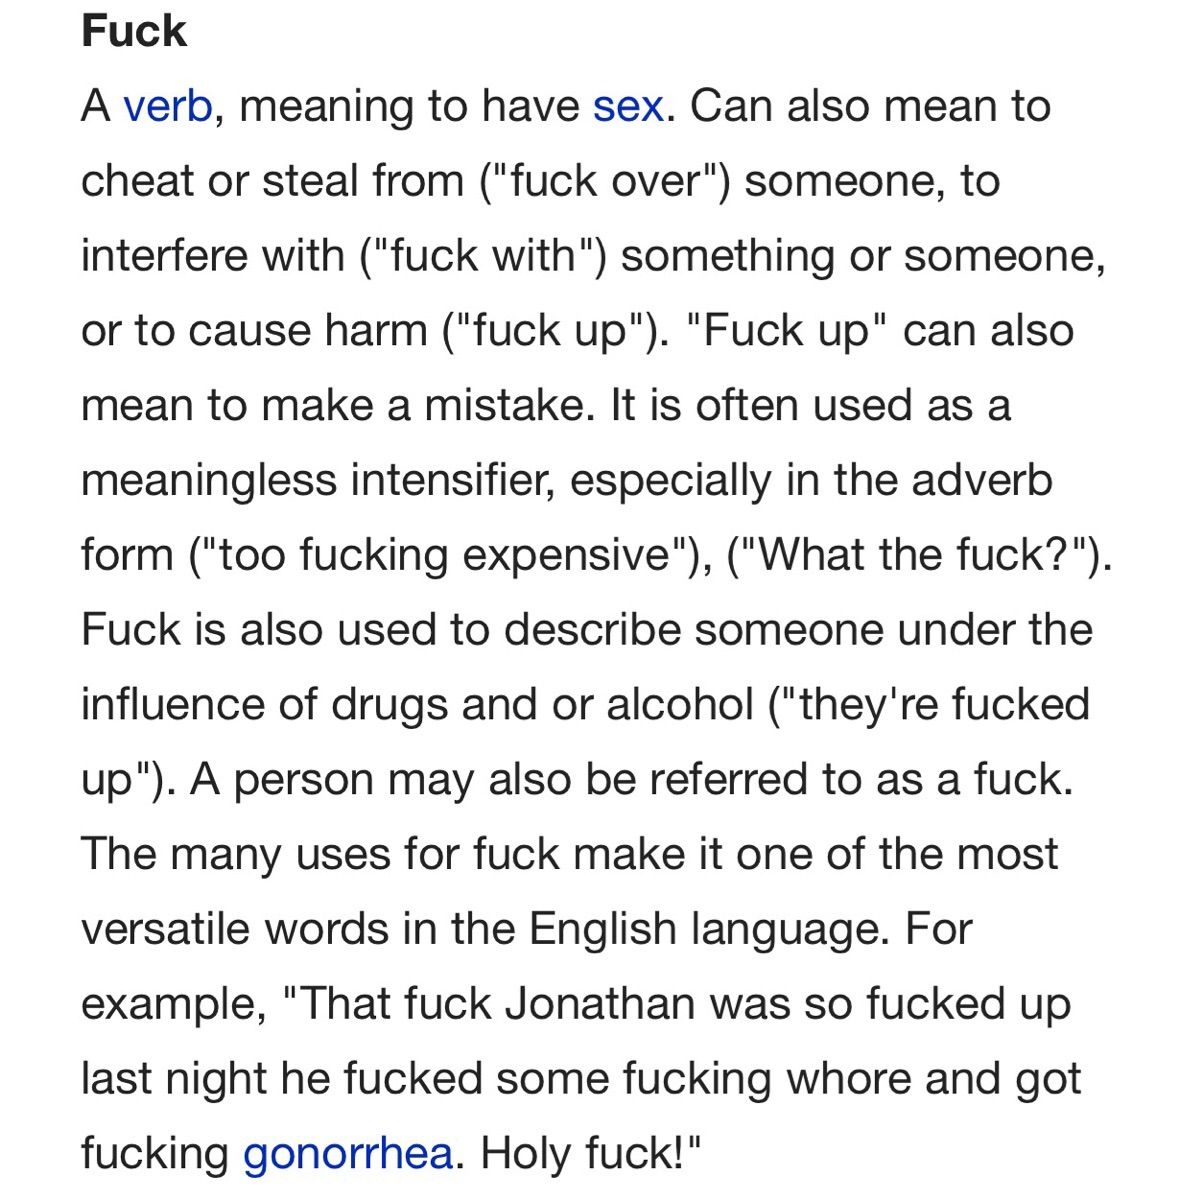 Wikipedia's definition of the word "***" is extremely amusing...